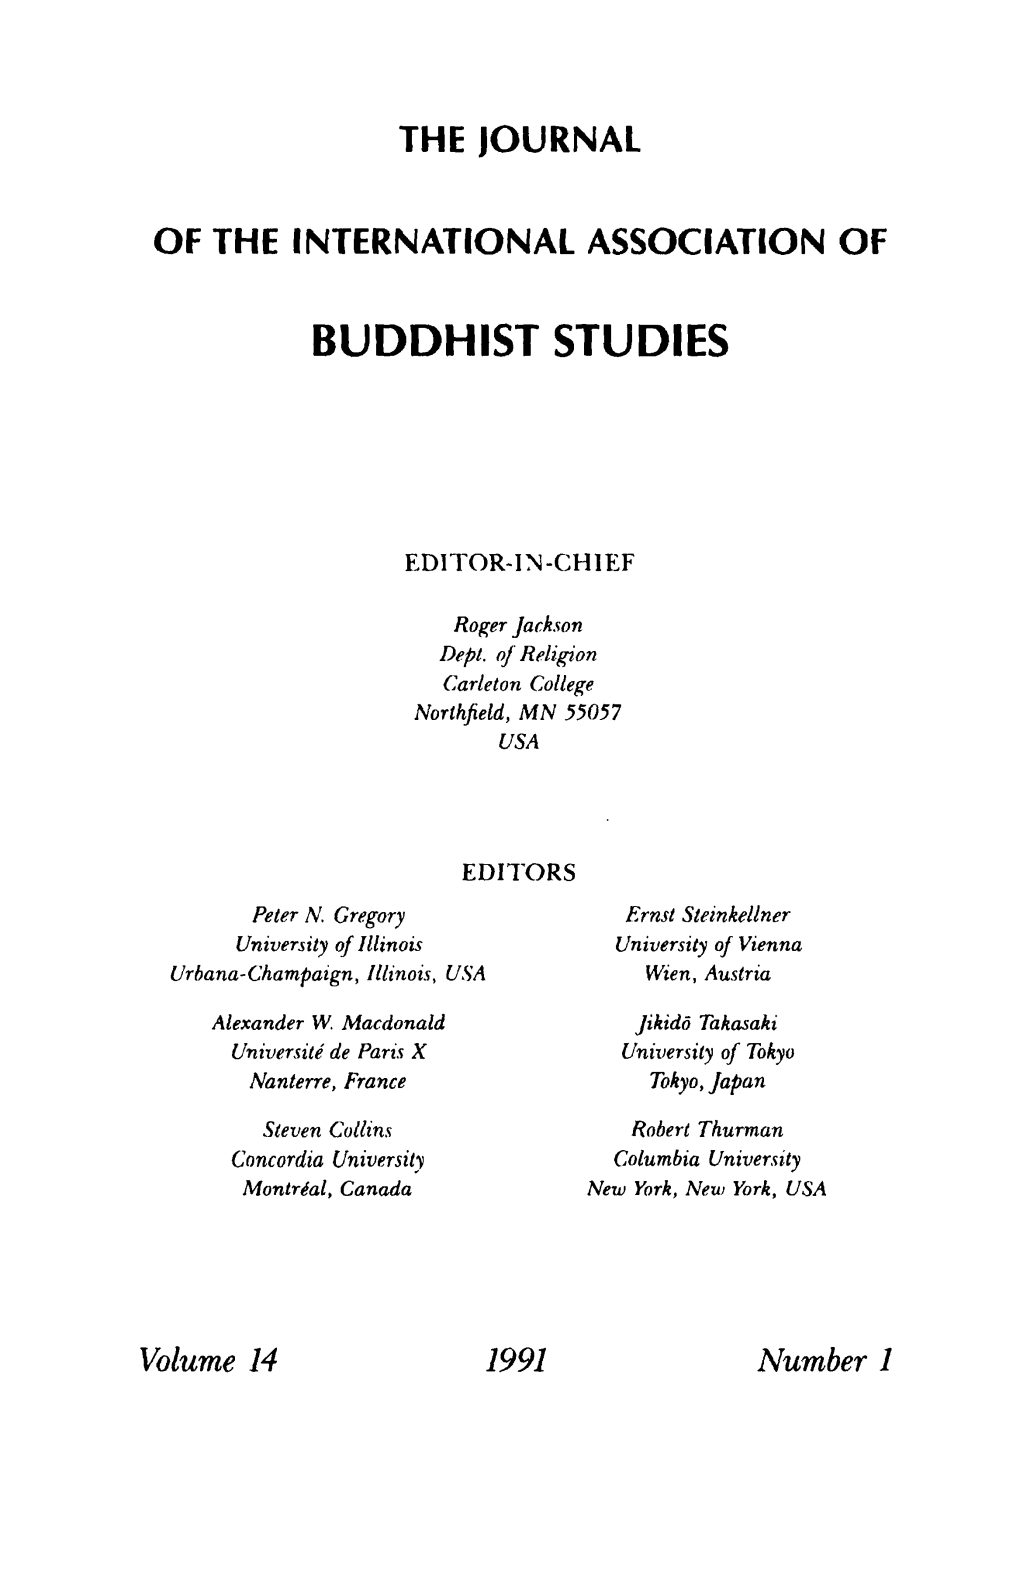 A Source Analysis of the Ruijing Lu ("Records of Miraculous Scriptures"), by Koichi Shinohara 73 4